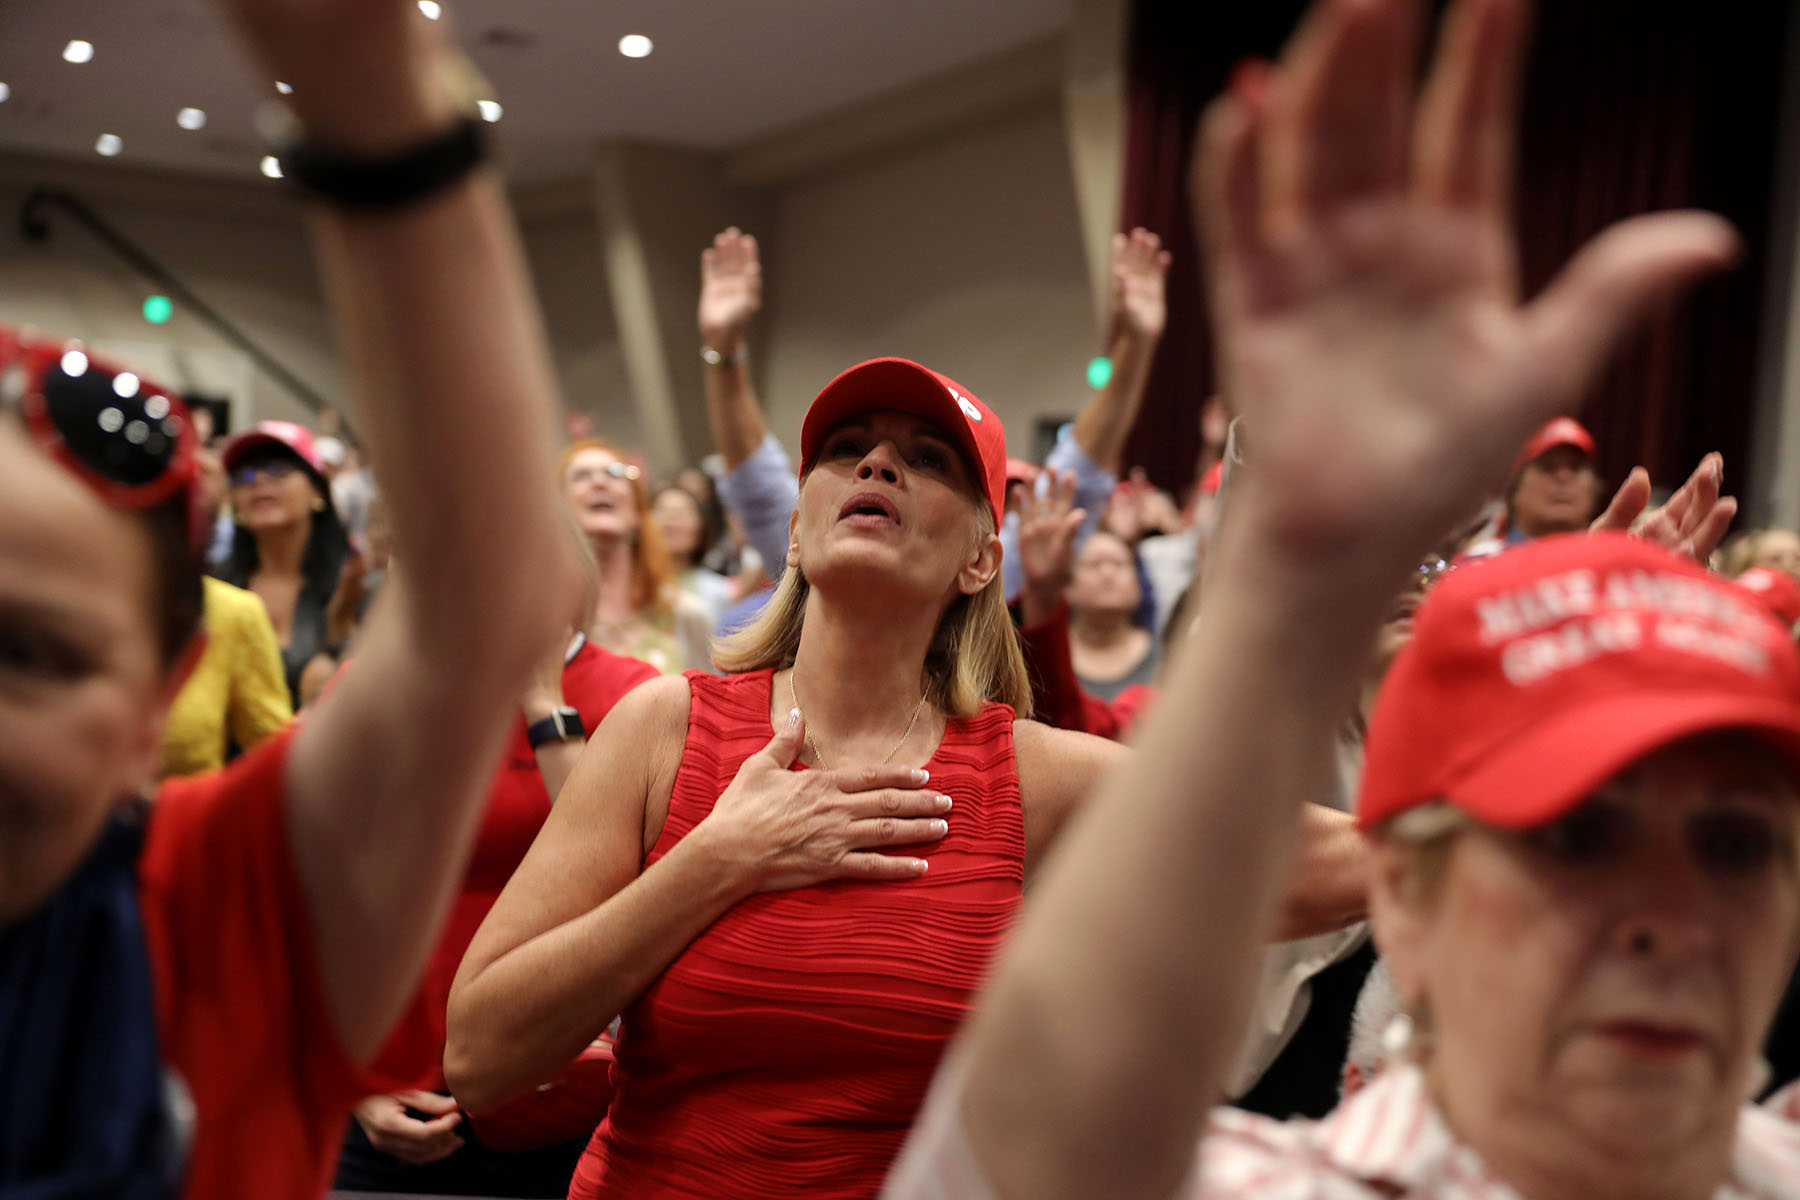 Supporters pray during an 'Evangelicals for Trump' campaign event.